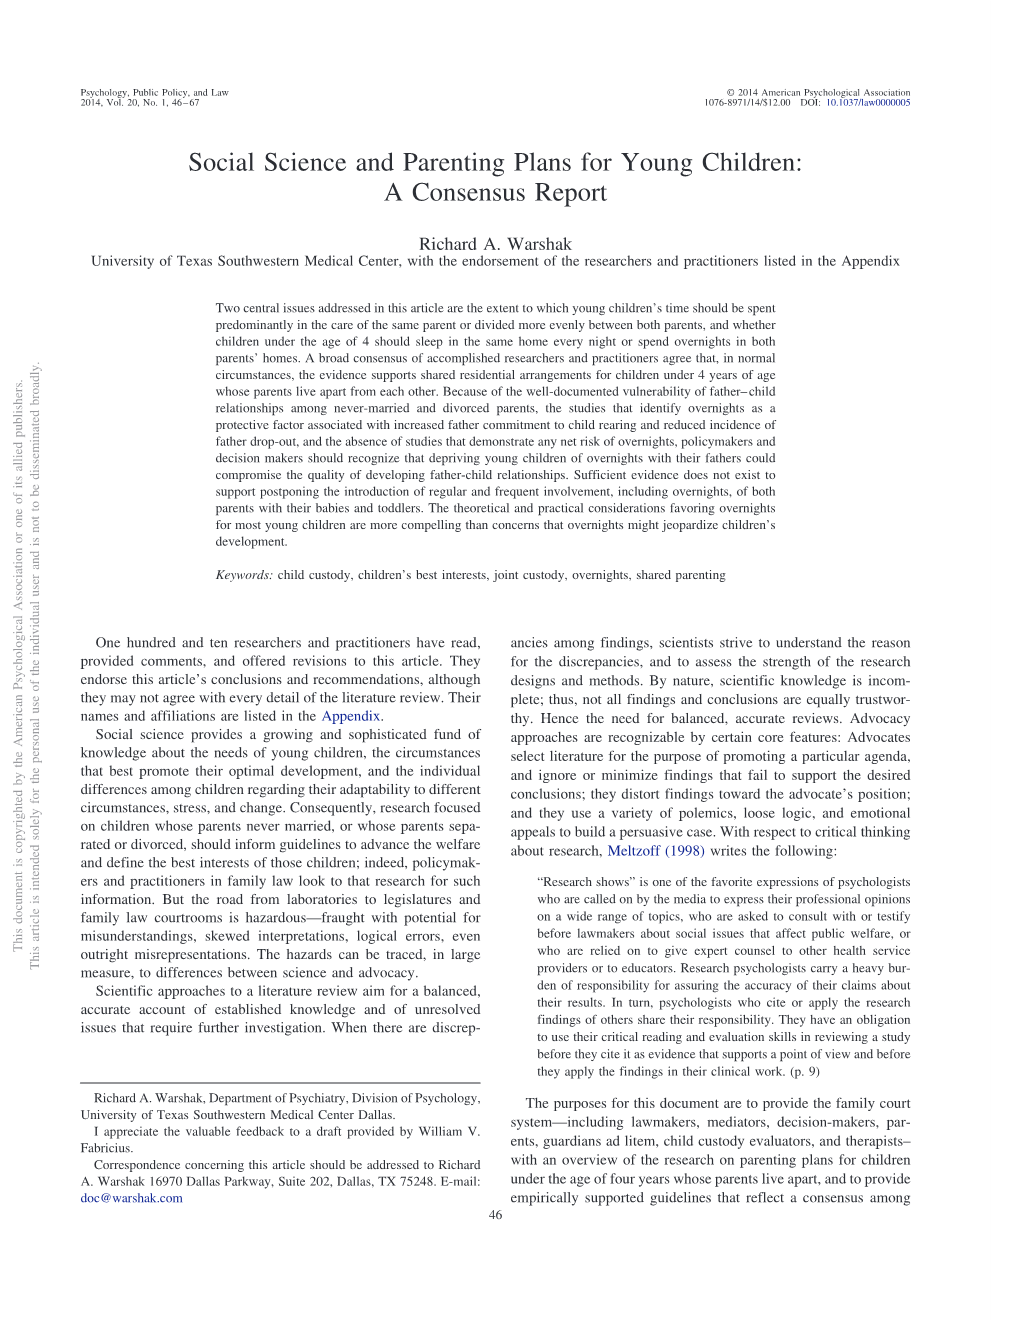 Social Science and Parenting Plans for Young Children: a Consensus Report